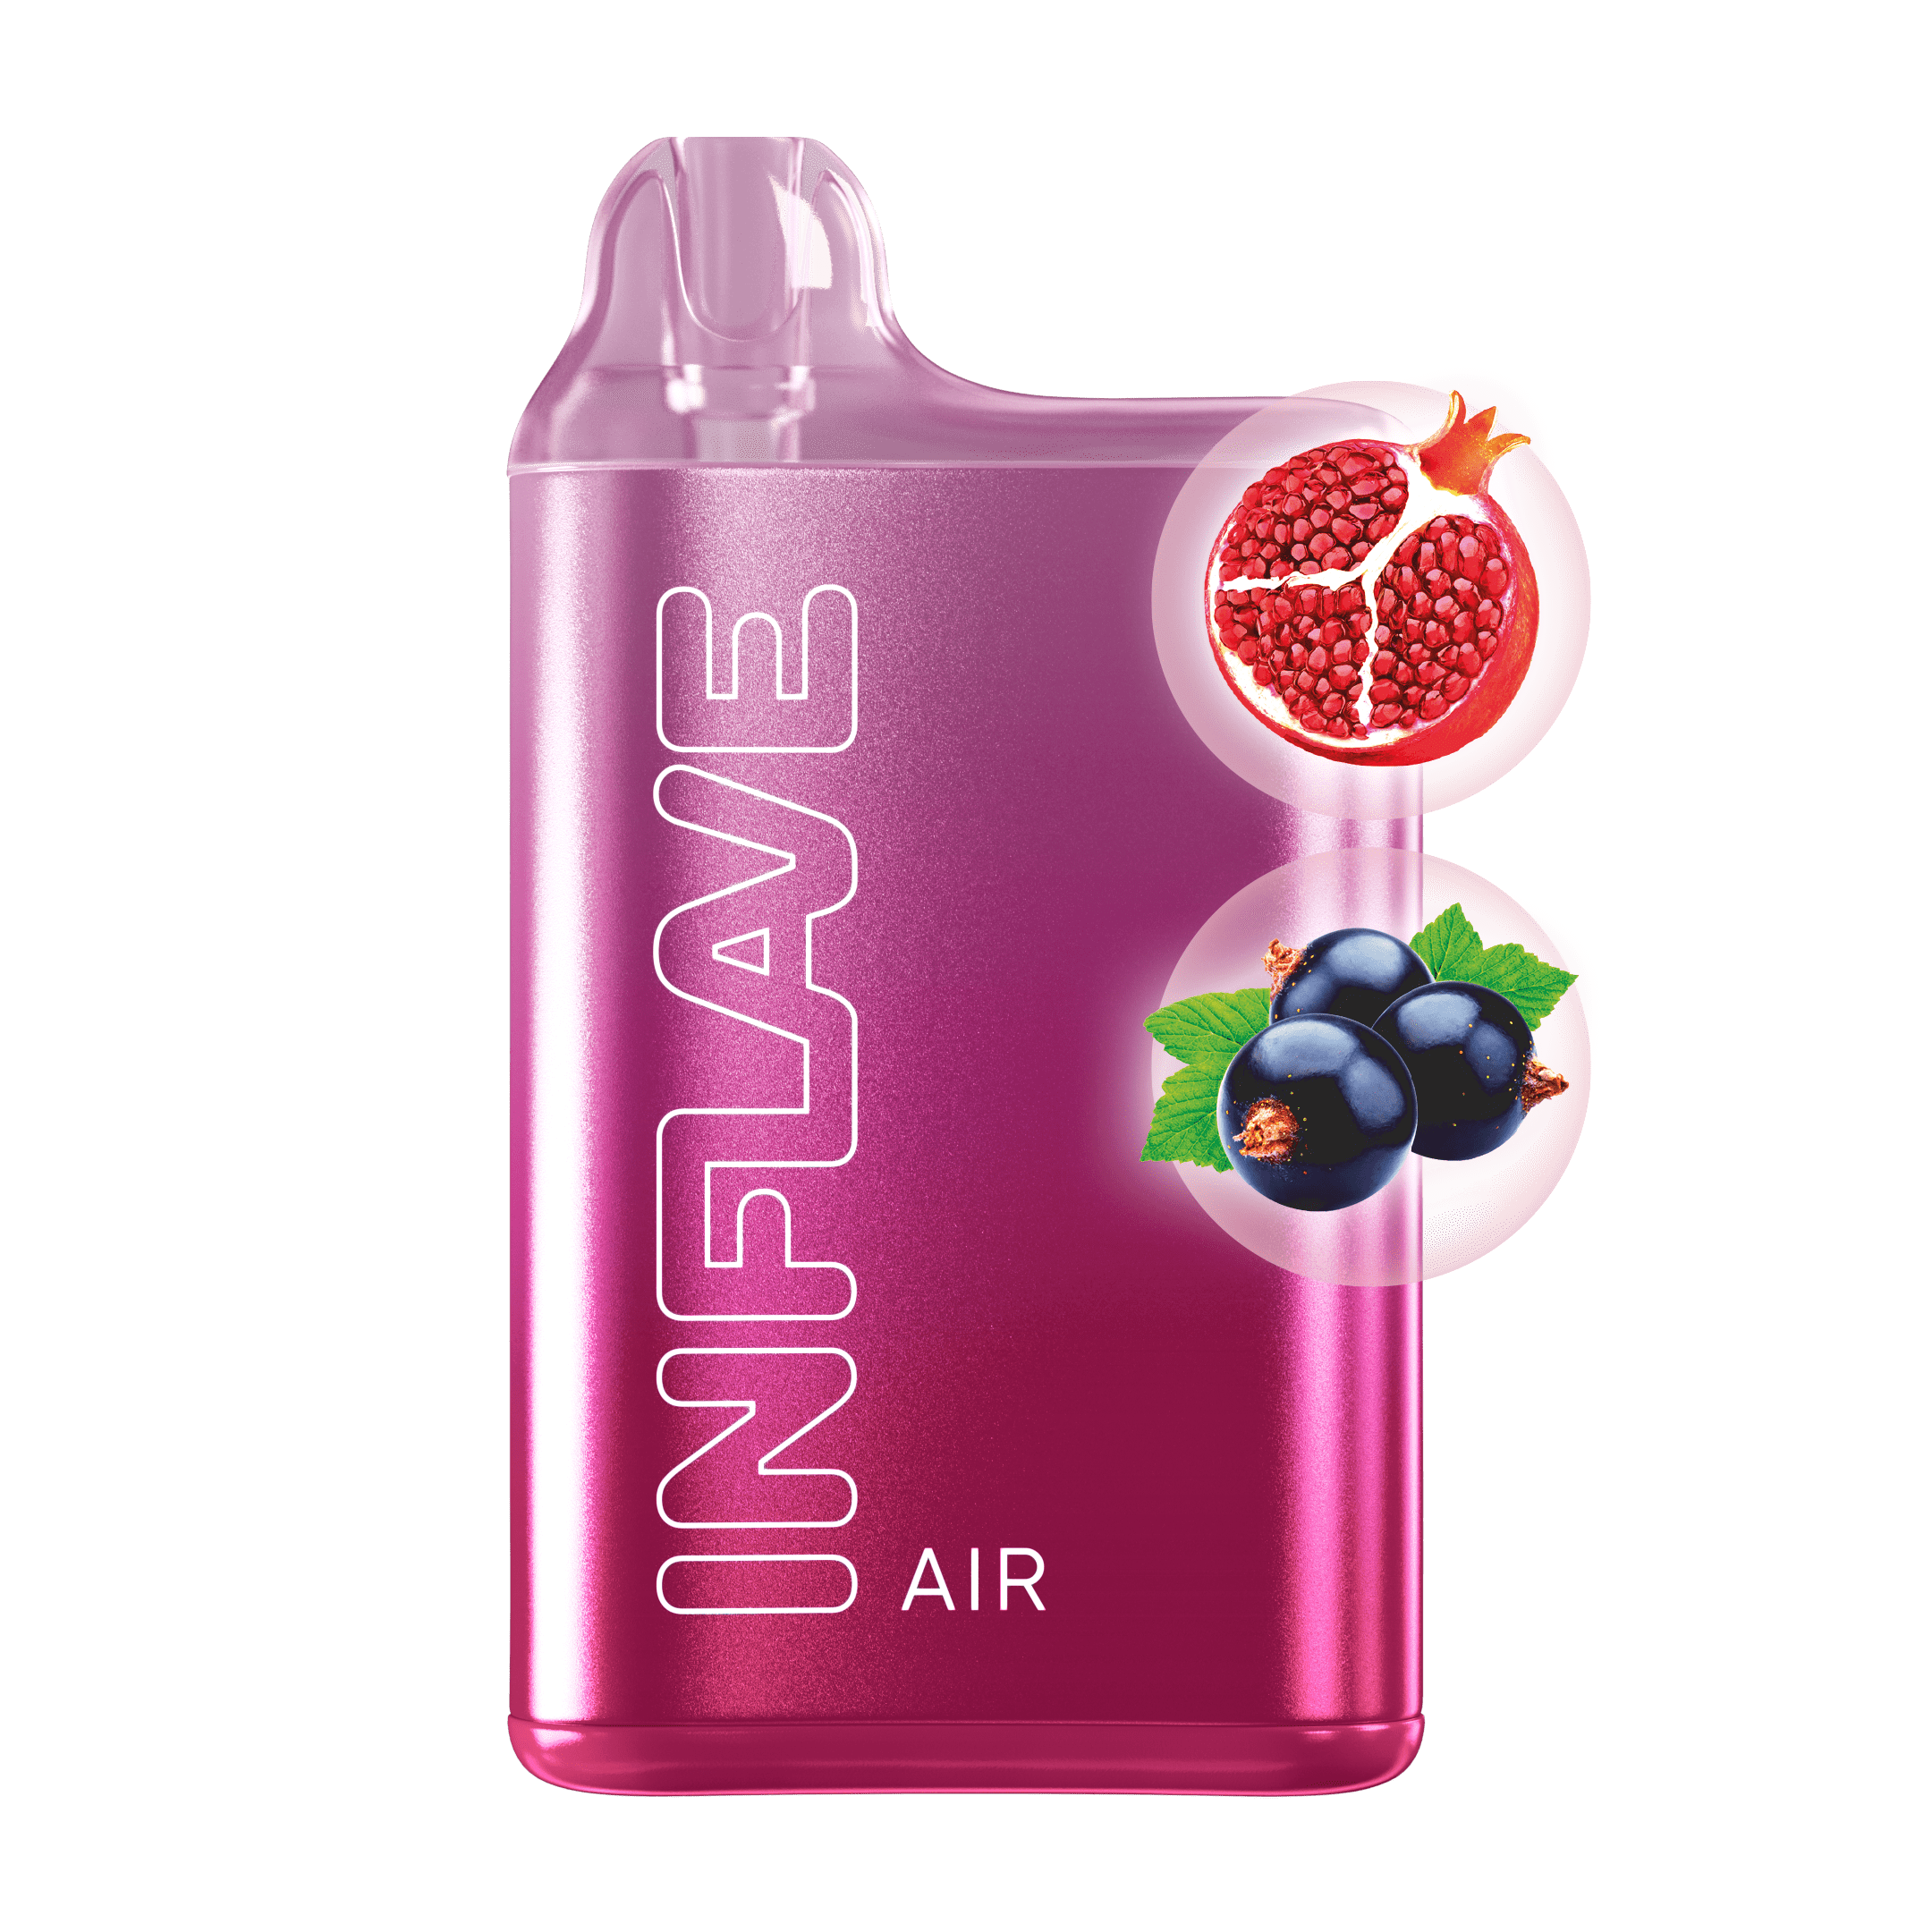 Inflave air. Inflave электронная сигарета гуава. Inflave жидкость. Inflave 6000. Inflave Bubble манго маракуя.